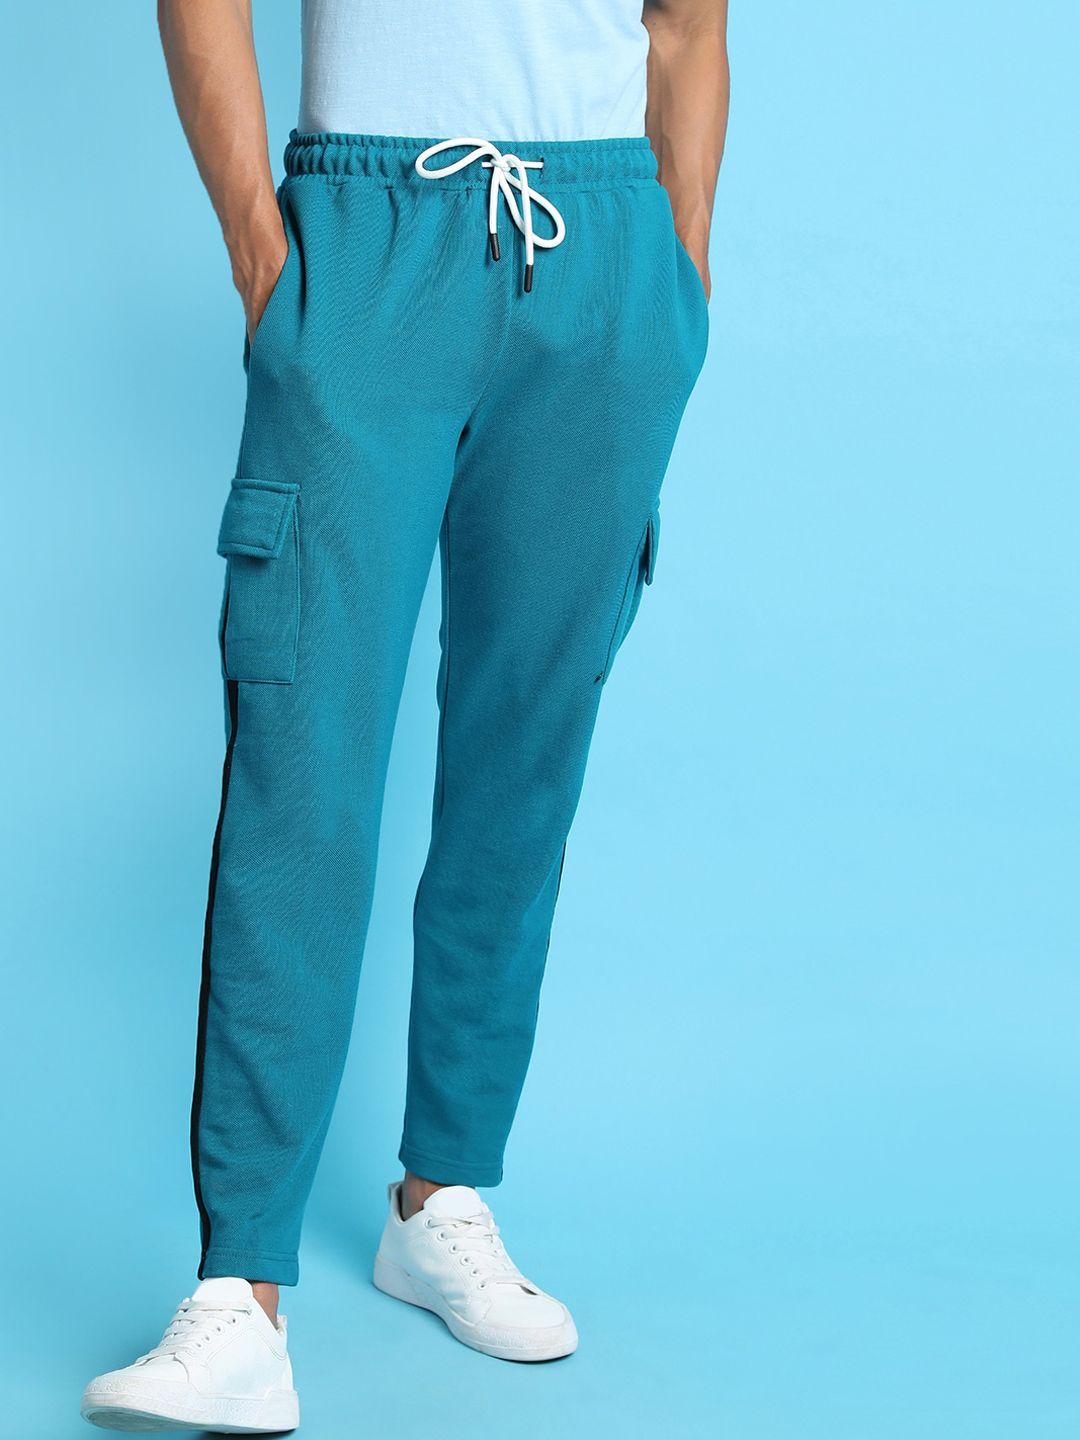 campus sutra men teal solid track pants